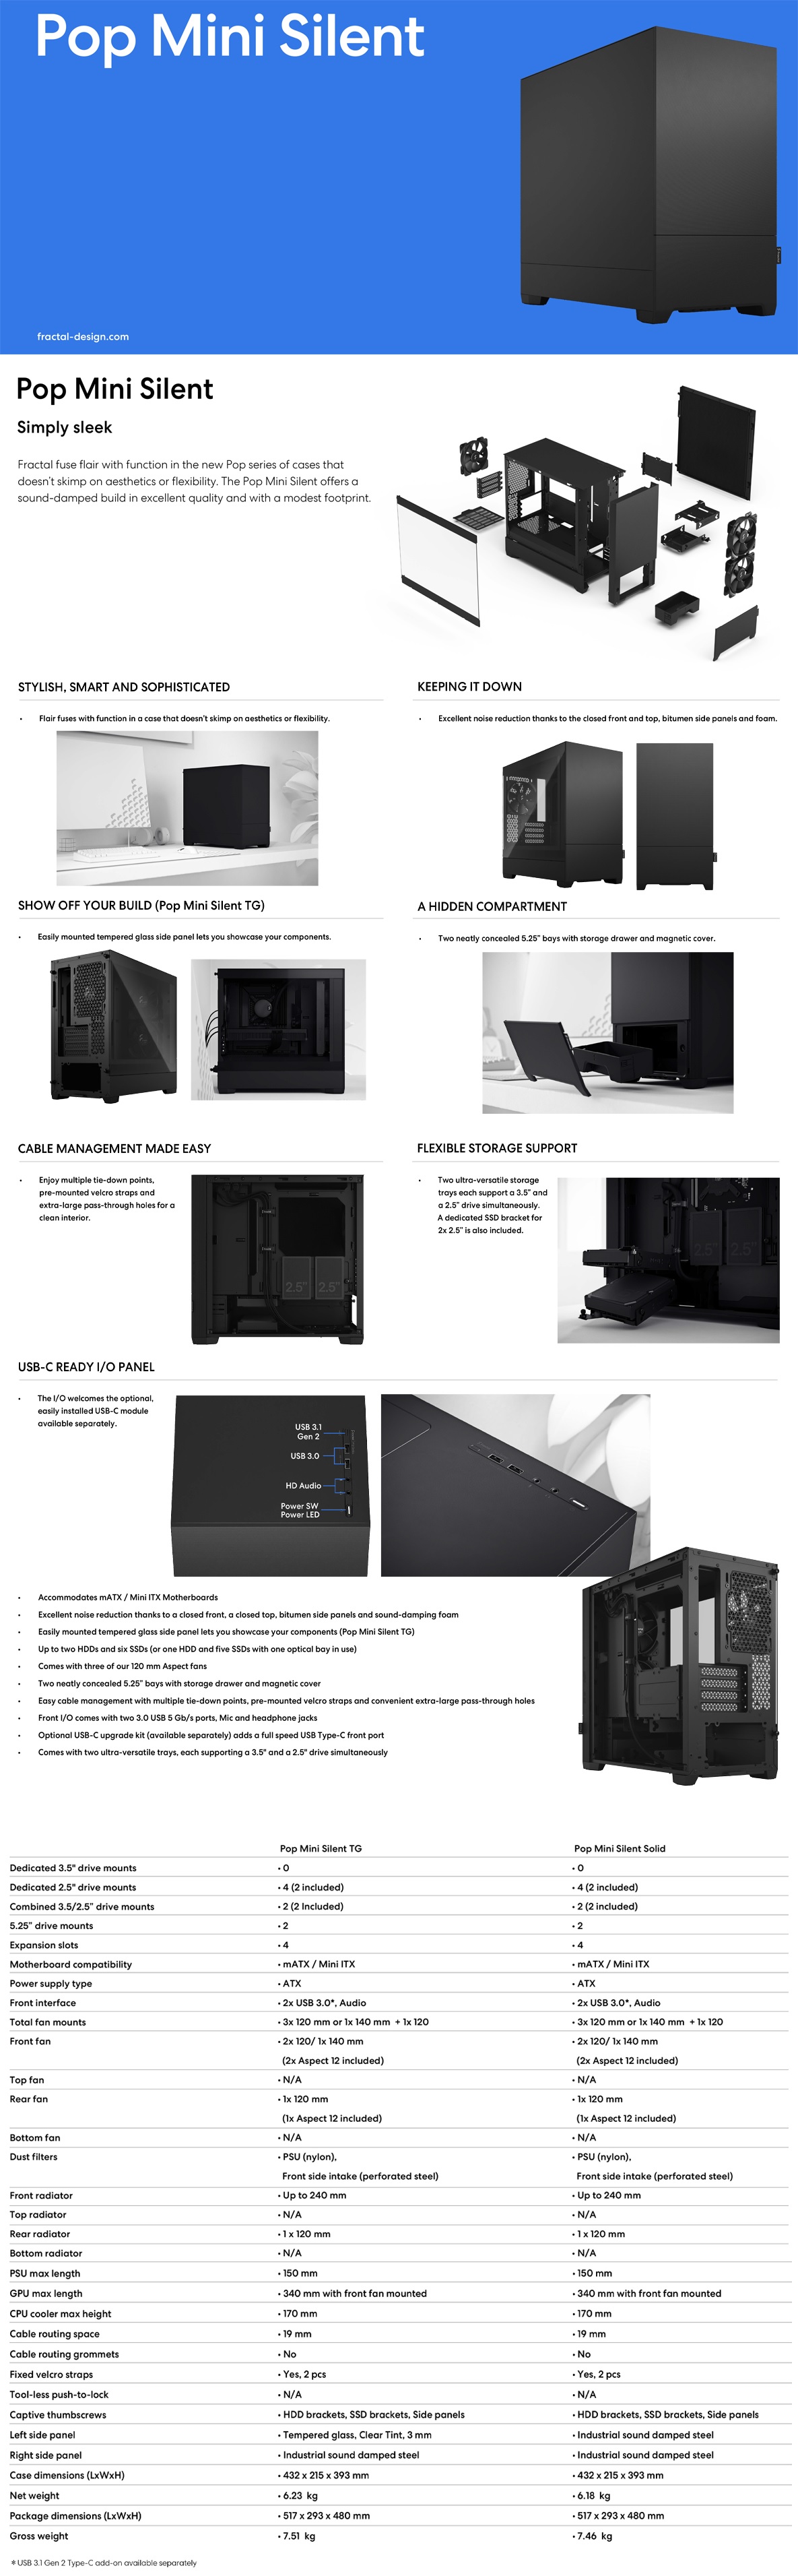 A large marketing image providing additional information about the product Fractal Design Pop Mini Silent Micro Tower Case - Black - Additional alt info not provided